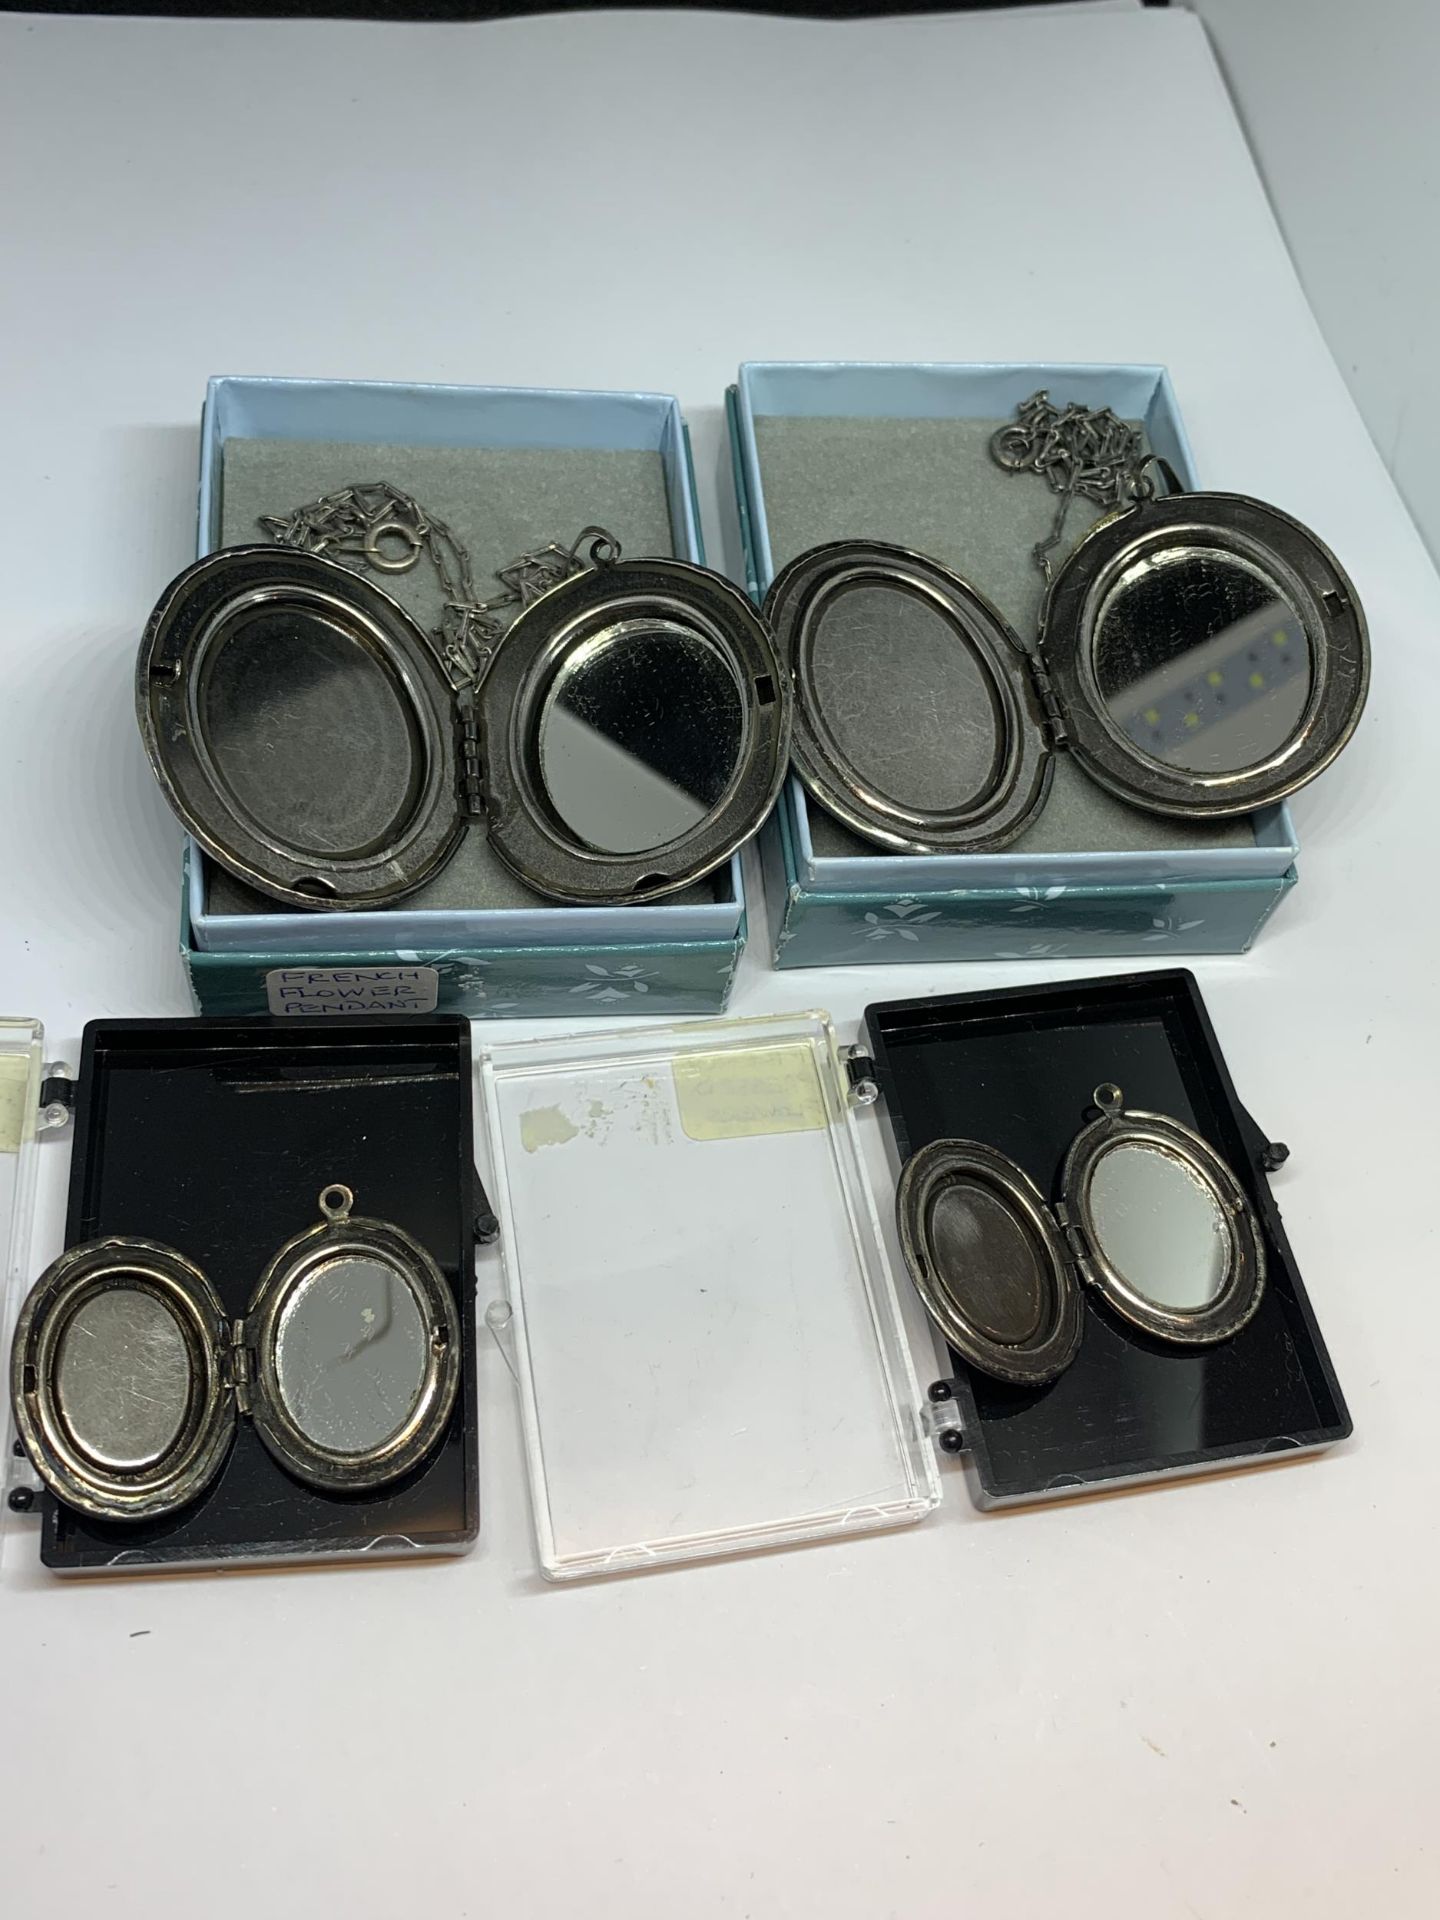 FOUR FRENCH PRESSED FLOWER LOCKETS TWO LARGE AND TWO SMALL ALL IN PRESENTATION BOXES - Image 6 of 6